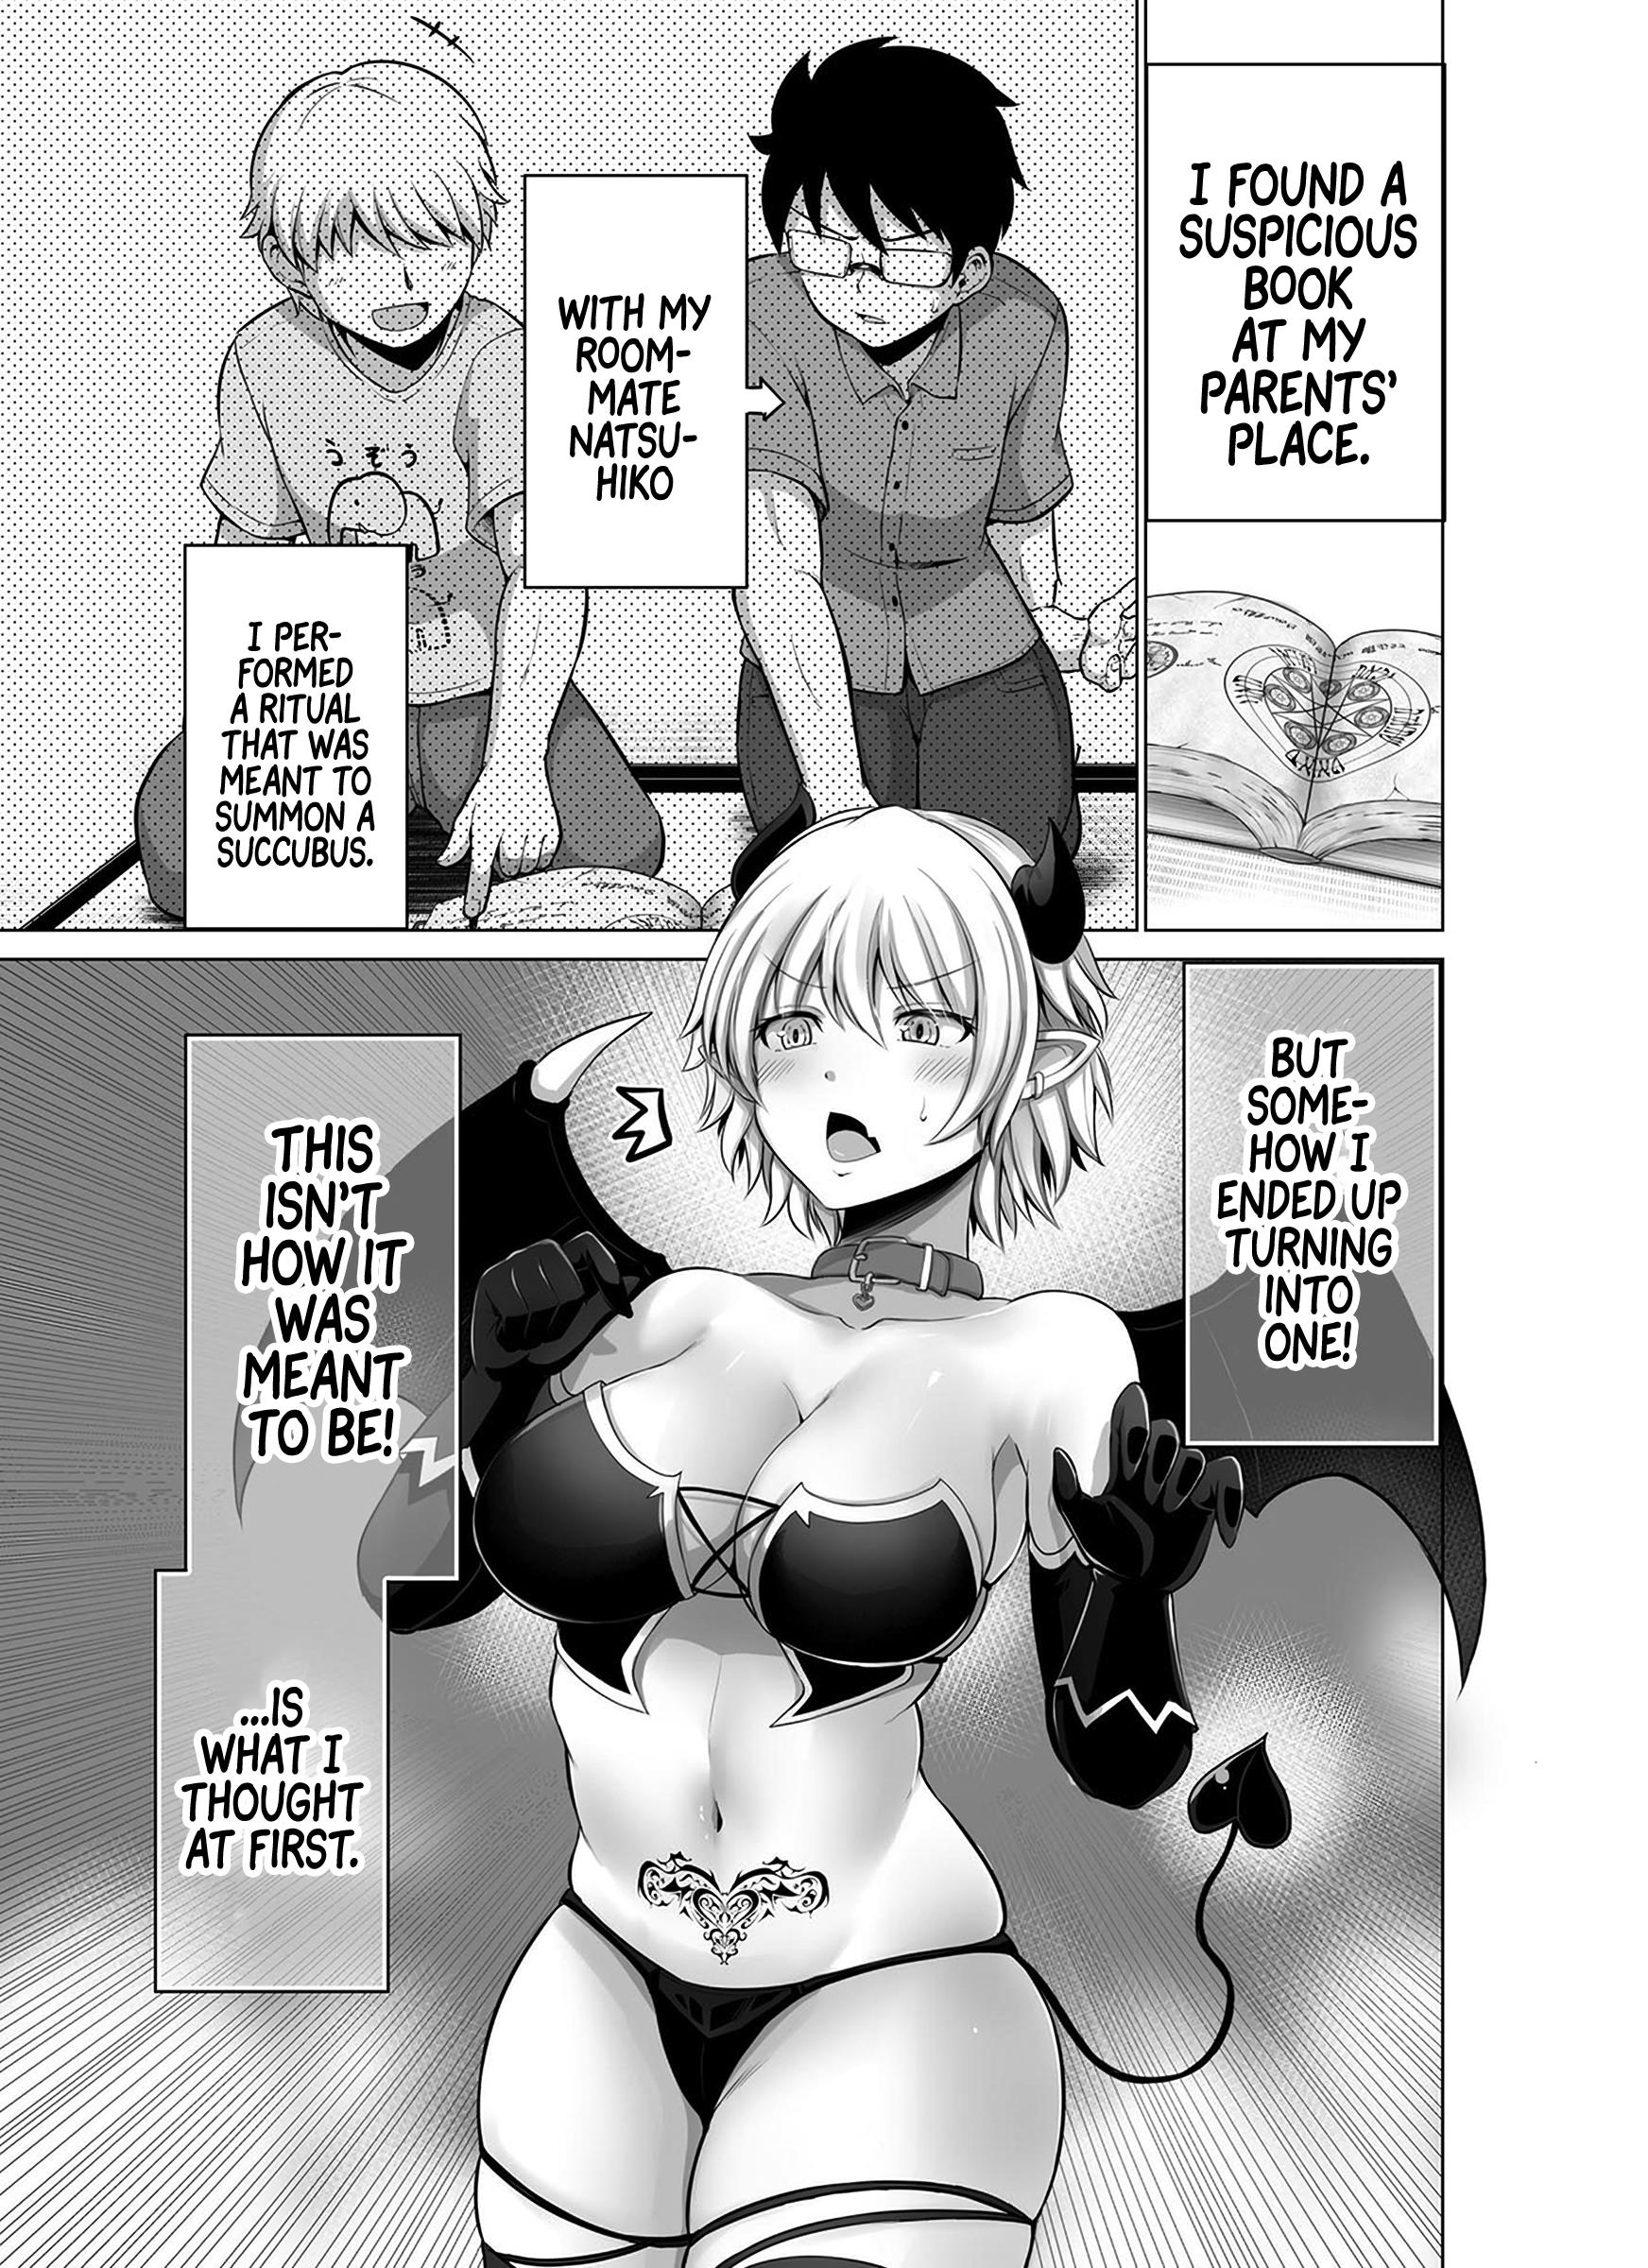 A New Living Arrangement With My Friend ♂ Turned Succubus - Page 1